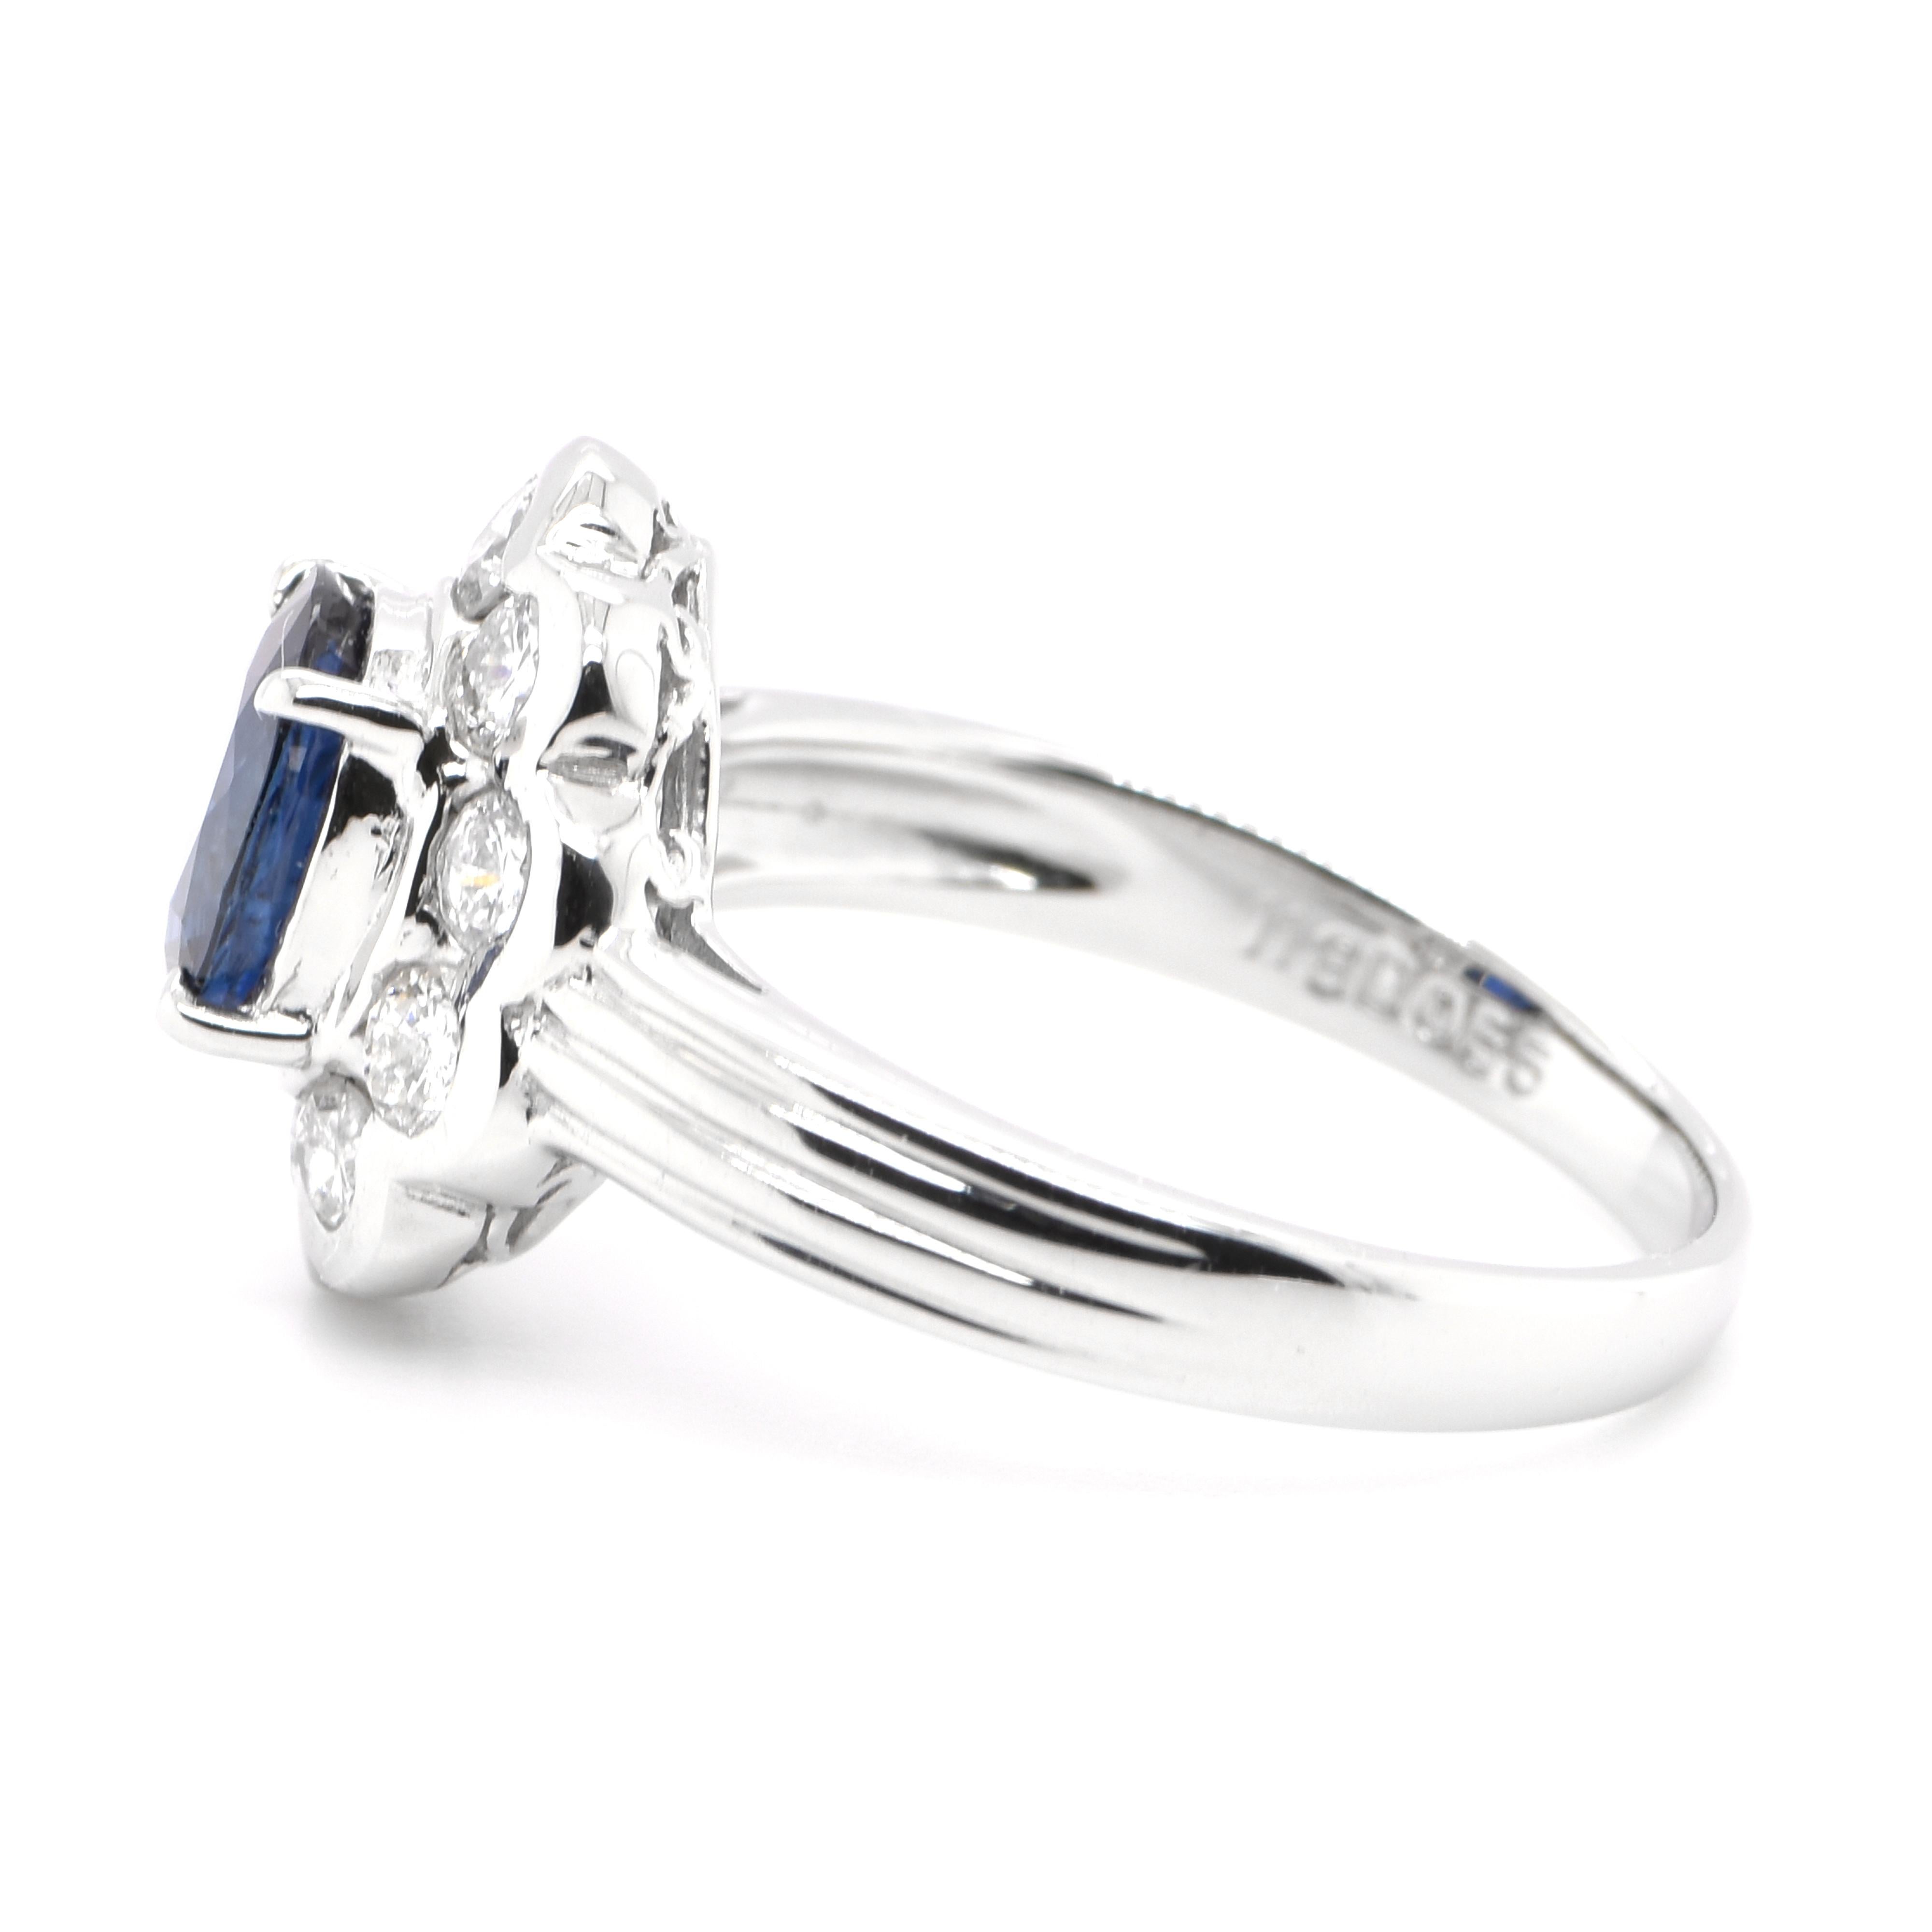 Oval Cut 1.18 Carat Natural Sapphire and Diamond Antique Ring Set in Platinum For Sale